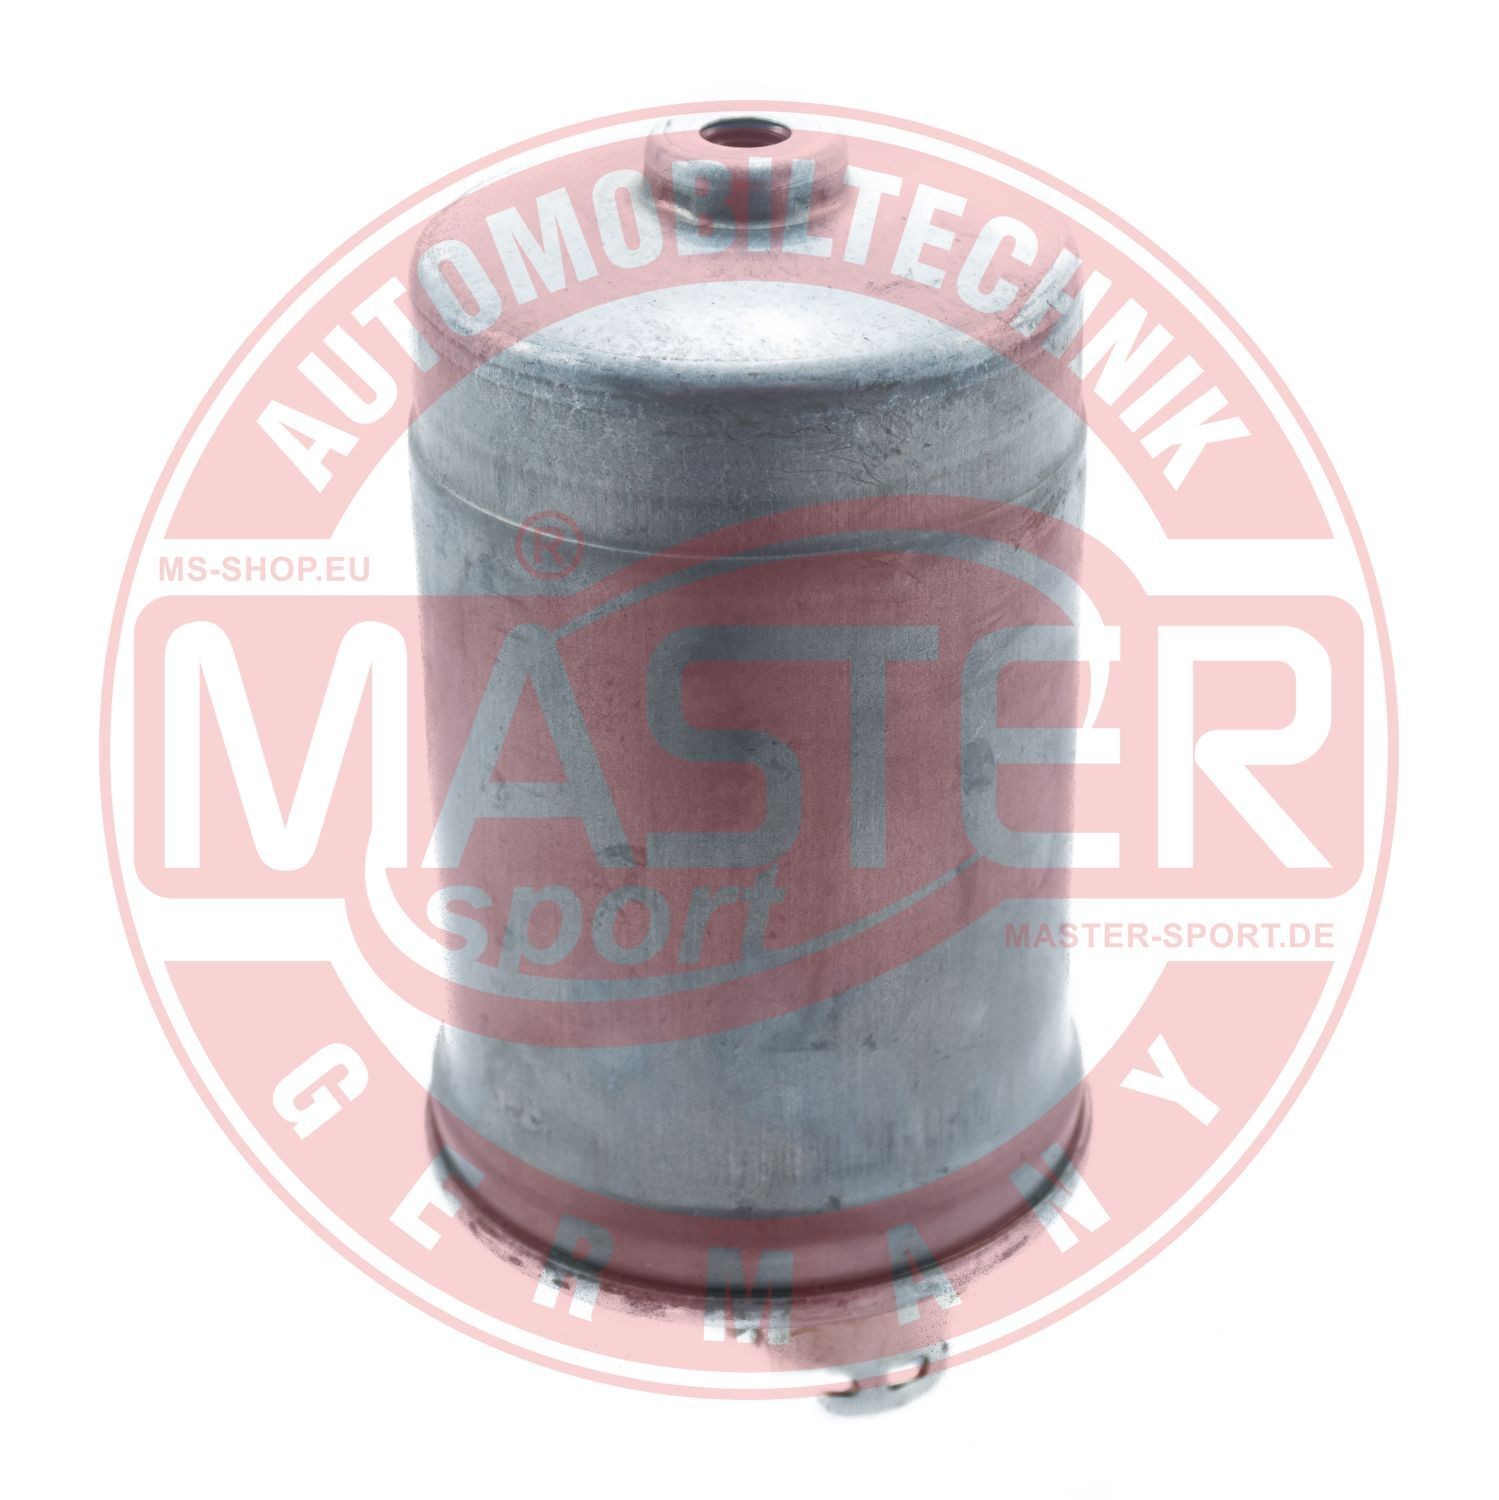 MASTER-SPORT 842/12-KF-PCS-MS Fuel filter In-Line Filter, 8mm, 8mm, with gaskets/seals